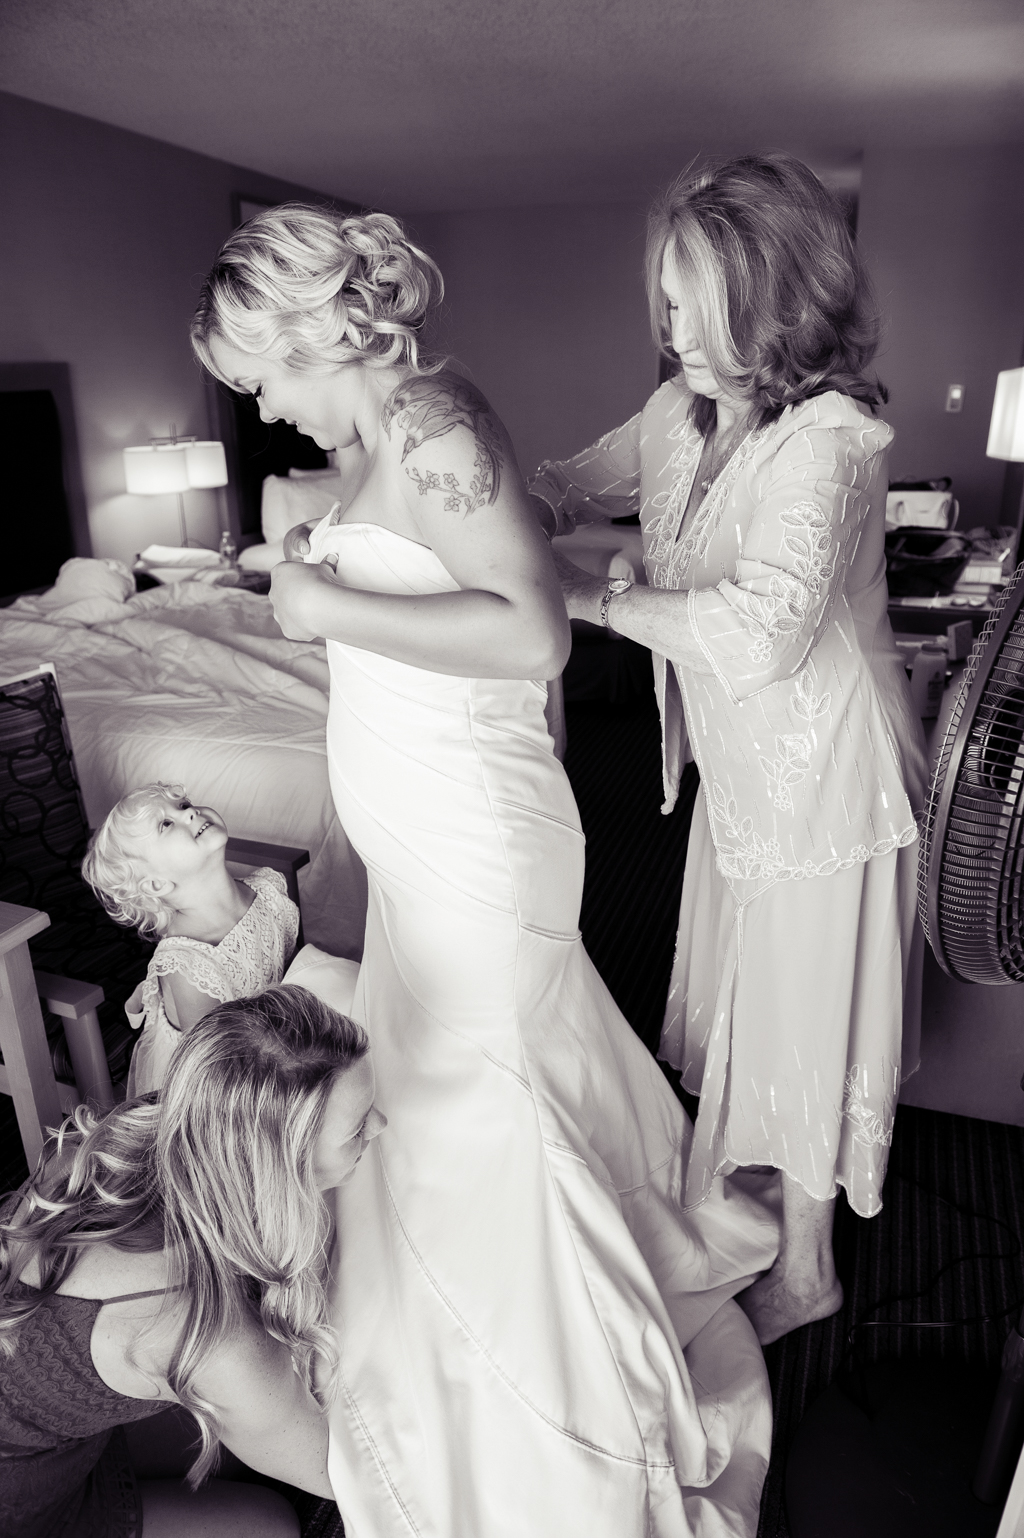 a young girl looks up at her mom as she puts on a wedding dress